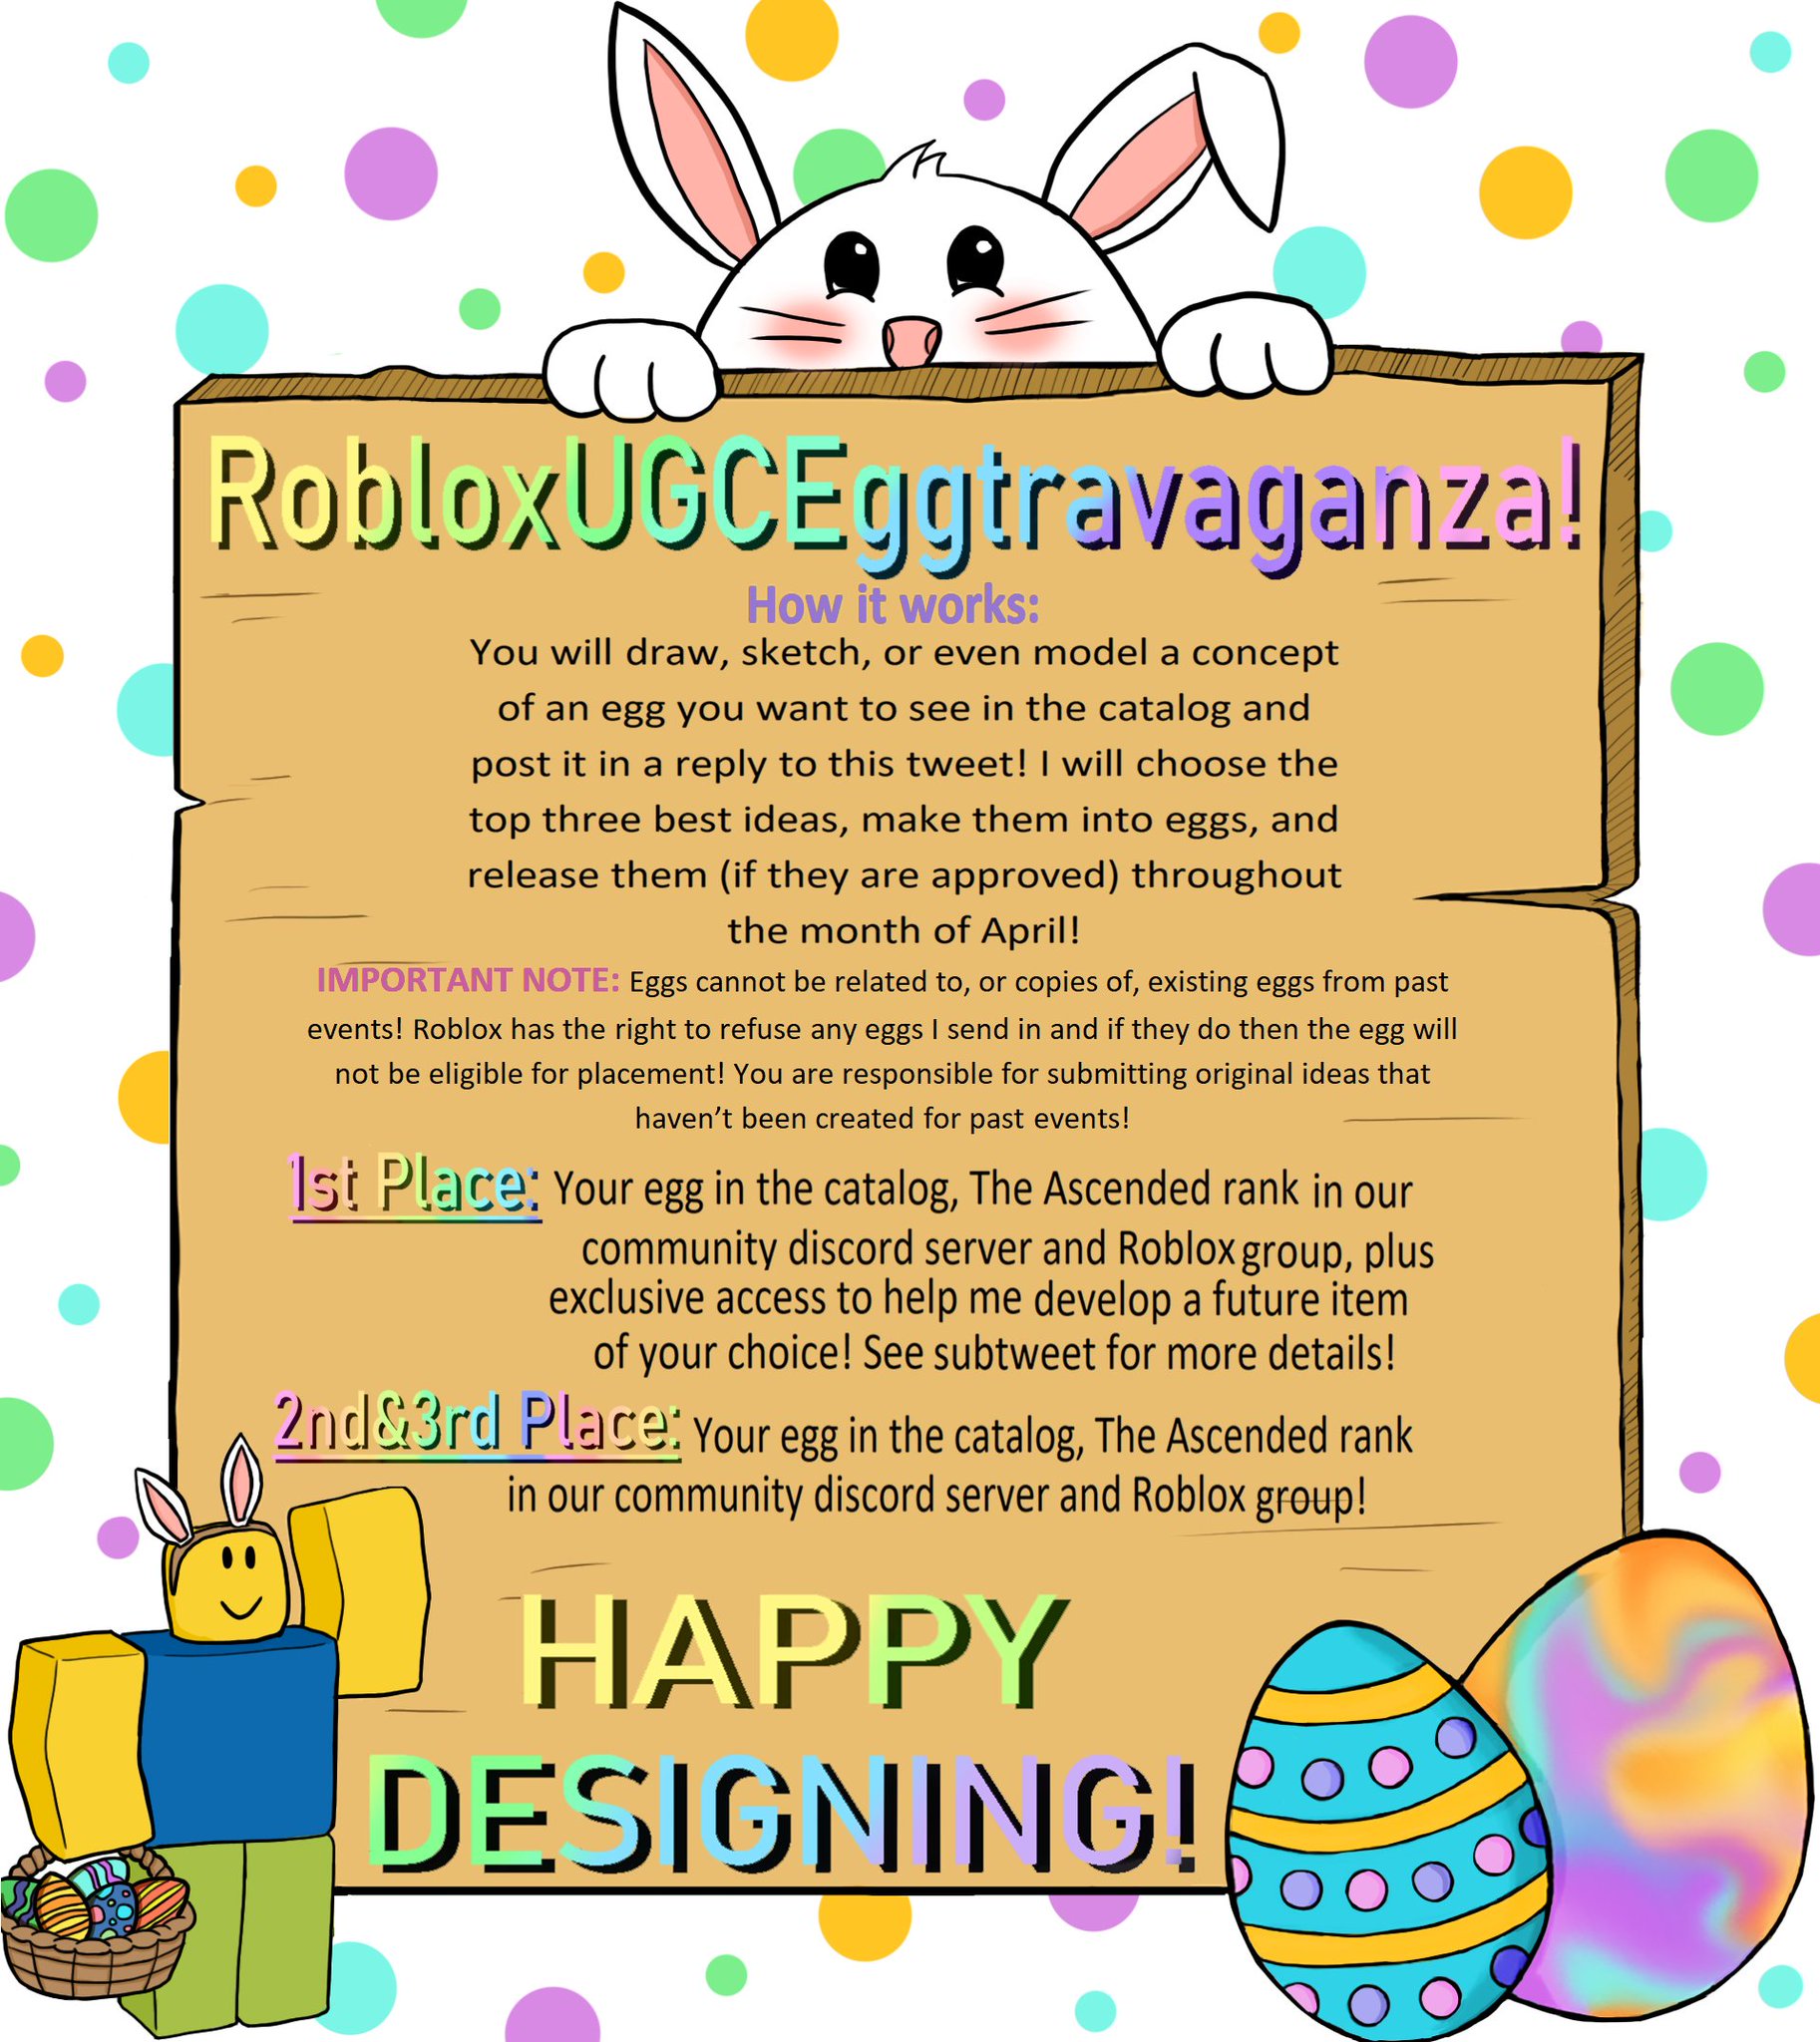 Reverse Polarity On Twitter My Favorite Roblox Event Has Always Been Anything To Do With Eggs Since Last October S Pumpkin Carving Contest Went So Great I Thought Hey Time To Do An Eggevent - el bobby de roblox